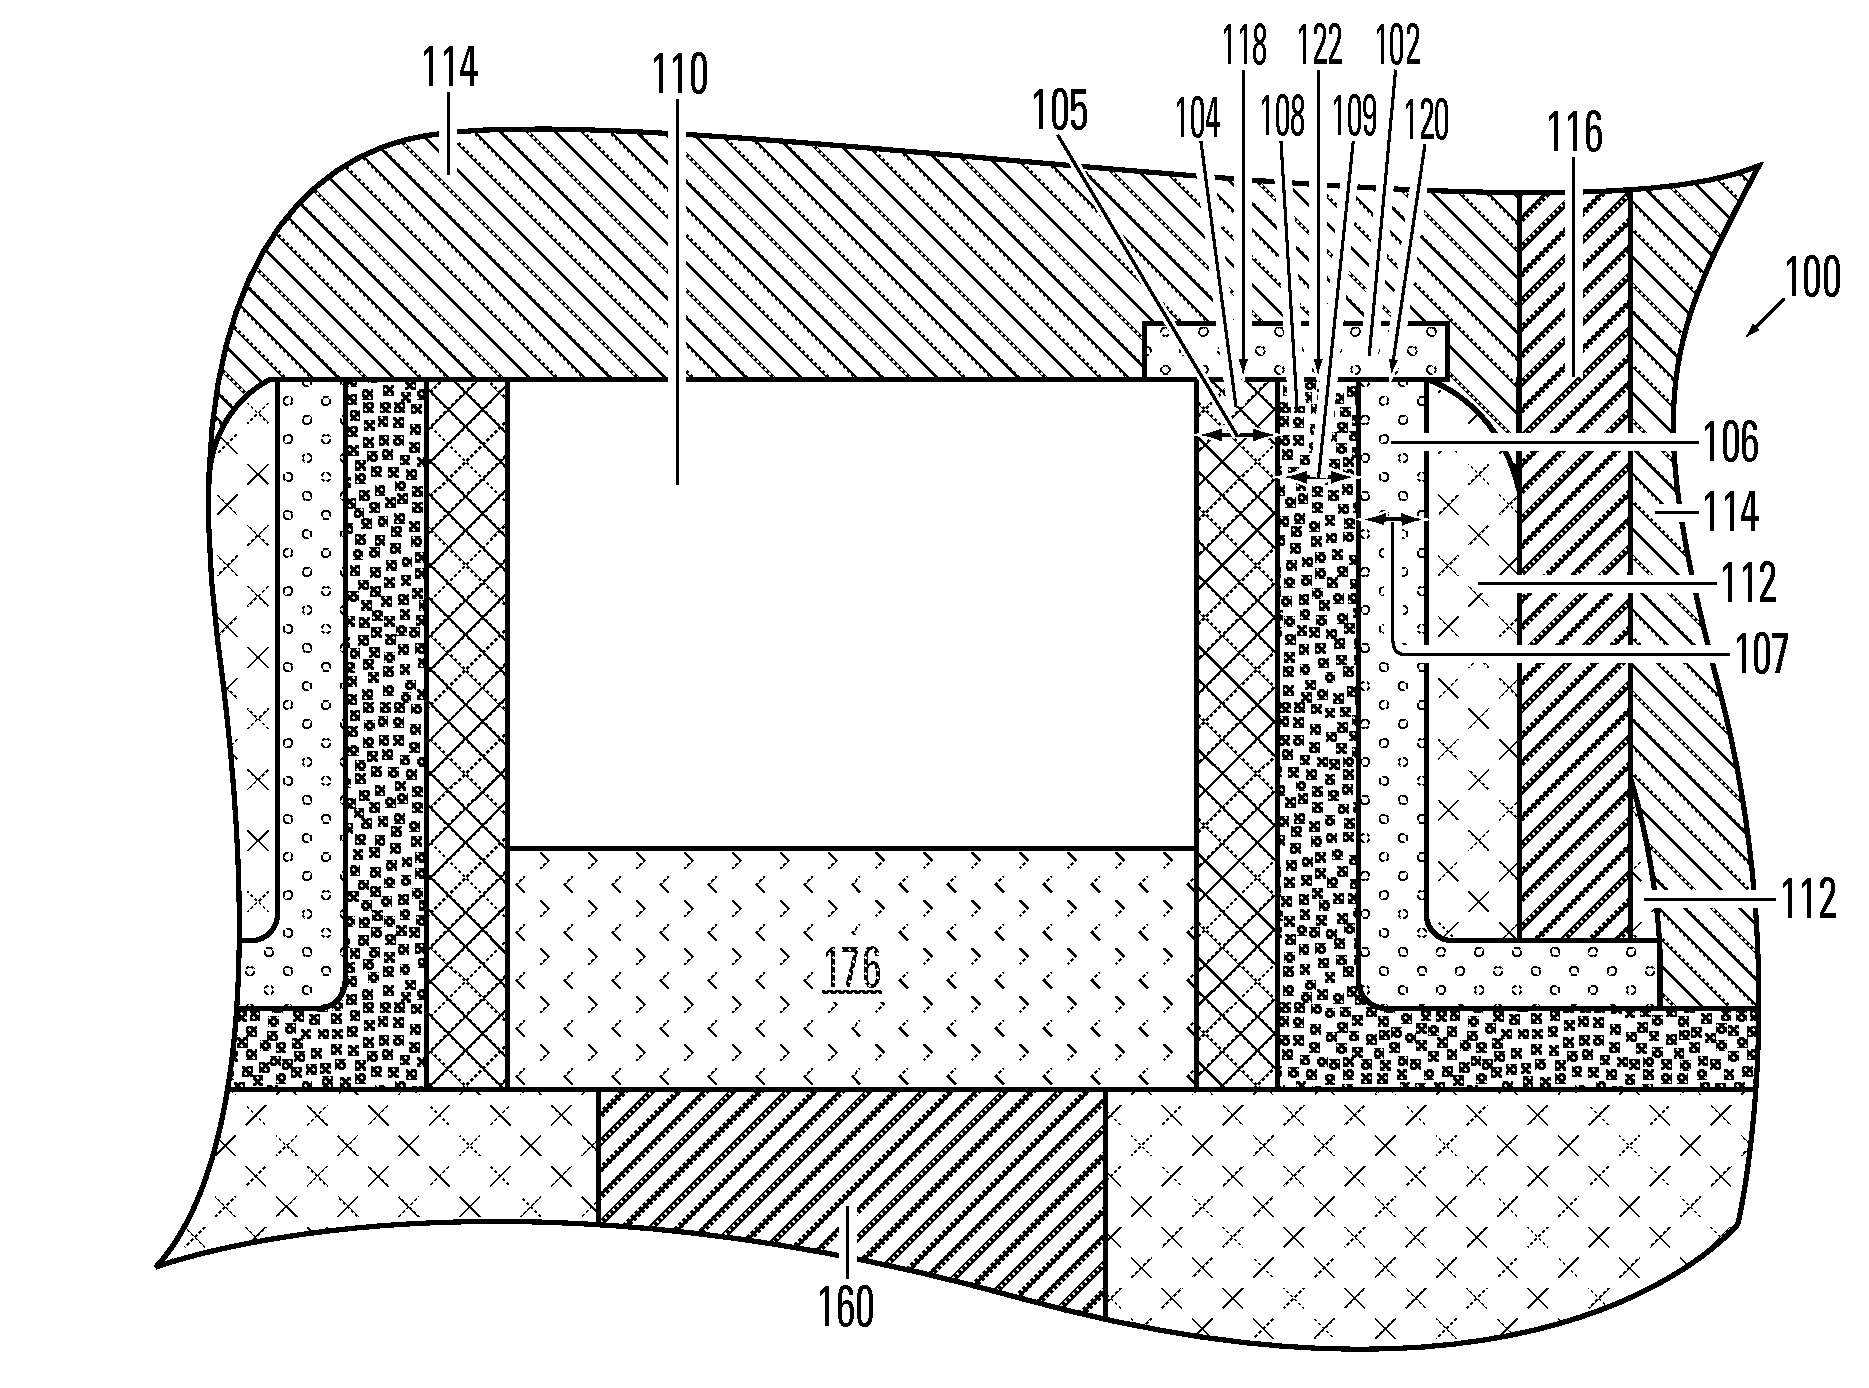 Resistor random access memory cell with l-shaped electrode